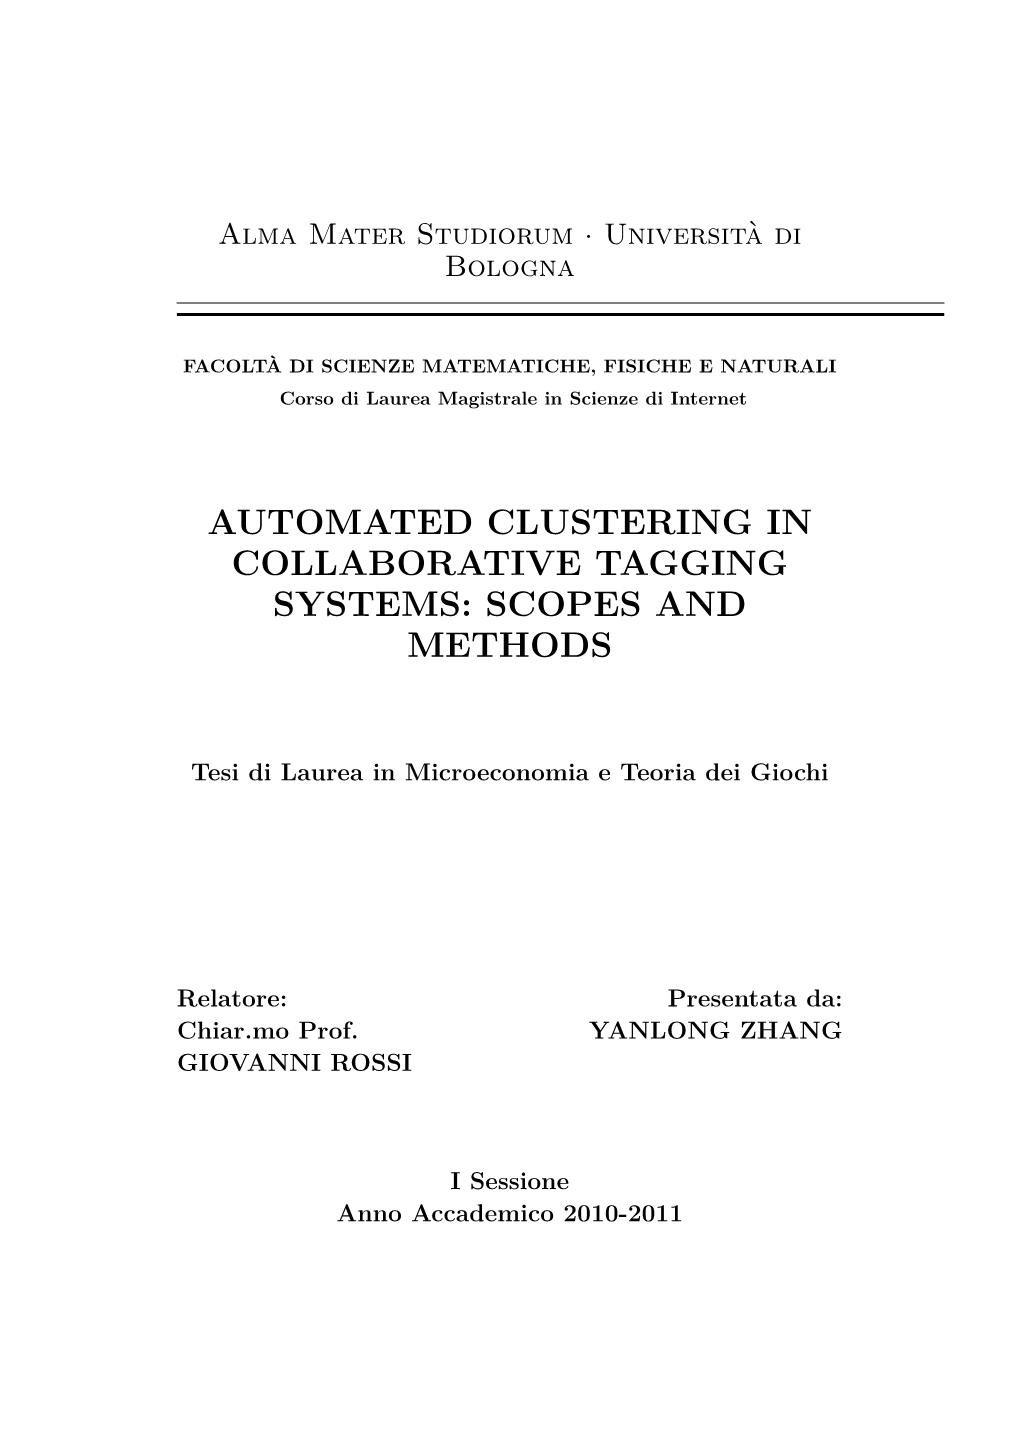 Automated Clustering in Collaborative Tagging Systems: Scopes and Methods